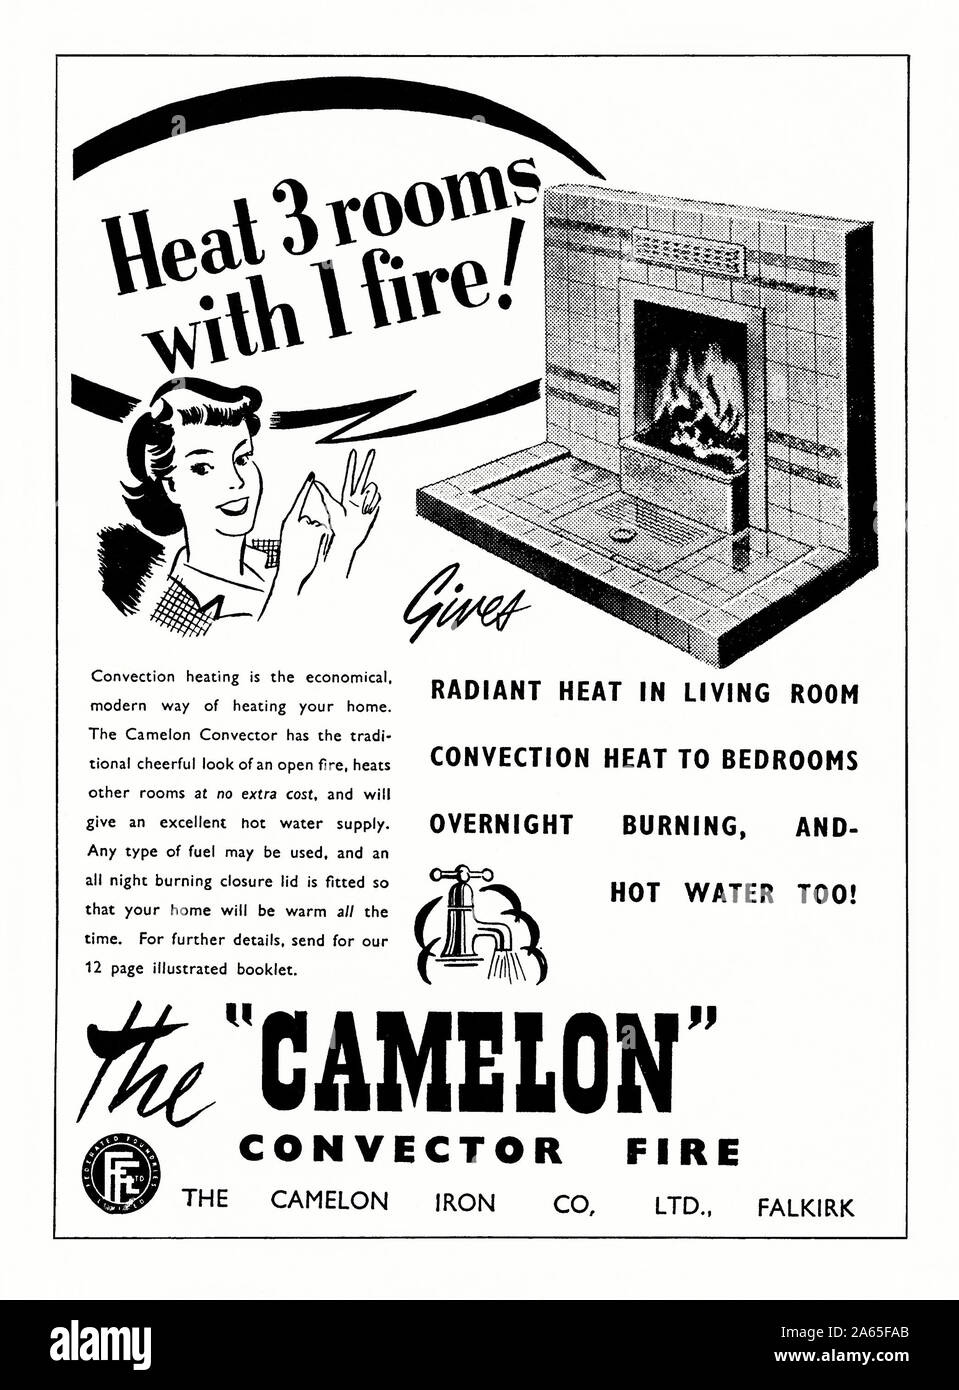 Advert for the 'Camelon' convector fire (or back boiler), 1951. The illustration and copy indicates that the tiled solid-fuel fire shown will heat three additional rooms by means of convectors whilst also supplying hot water to the house. The Camelon was made in Falkirk, Scotland, UK. A back boiler is a heating device which is fitted behind a household fireplace, enabling it to provide heat to the house for via convection units or radiators plus supplying hot water. Stock Photo